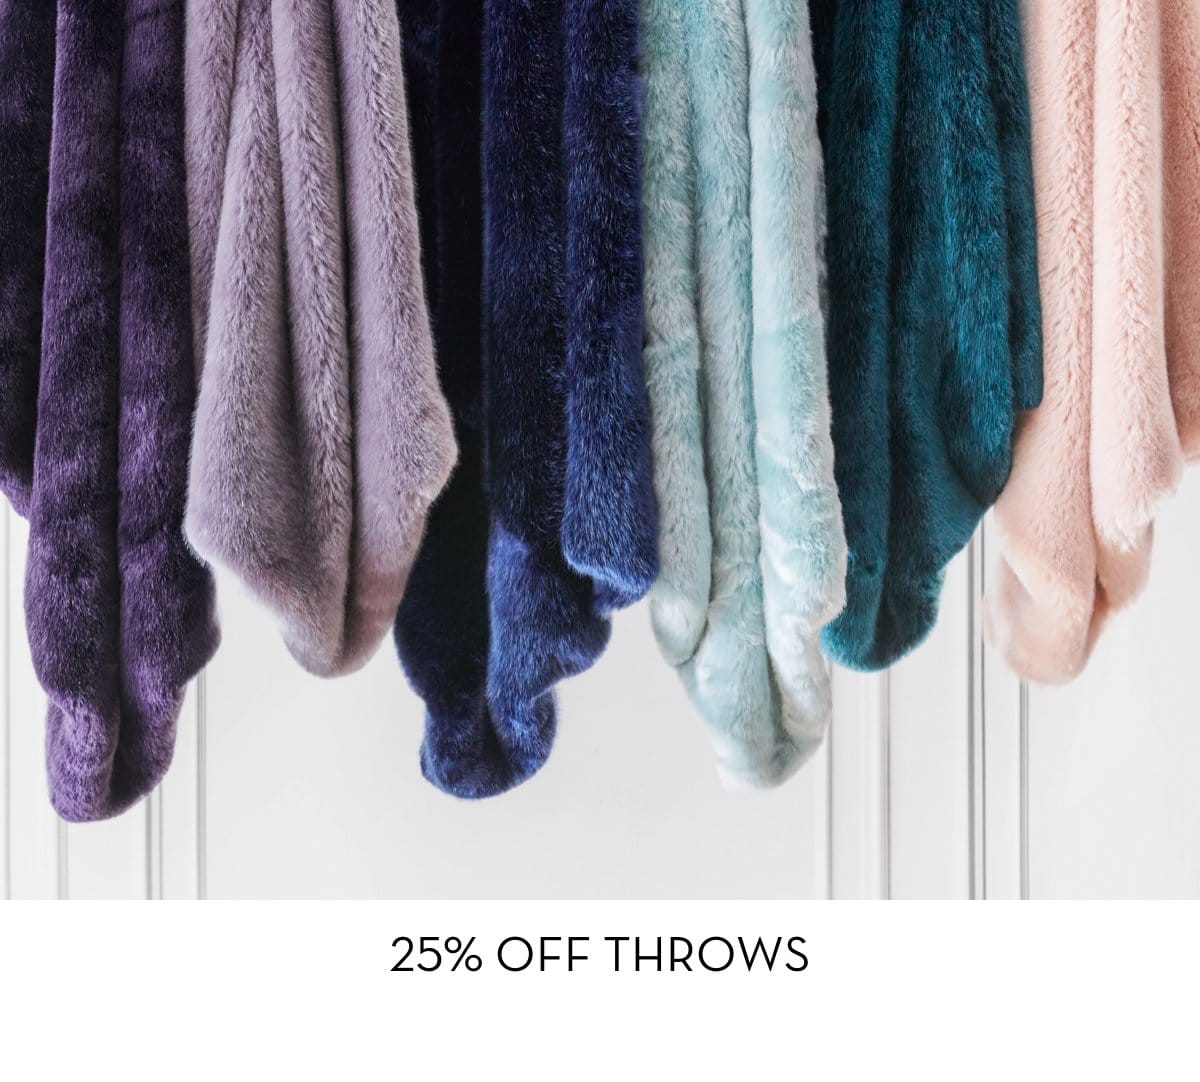 20 Percent off Throws